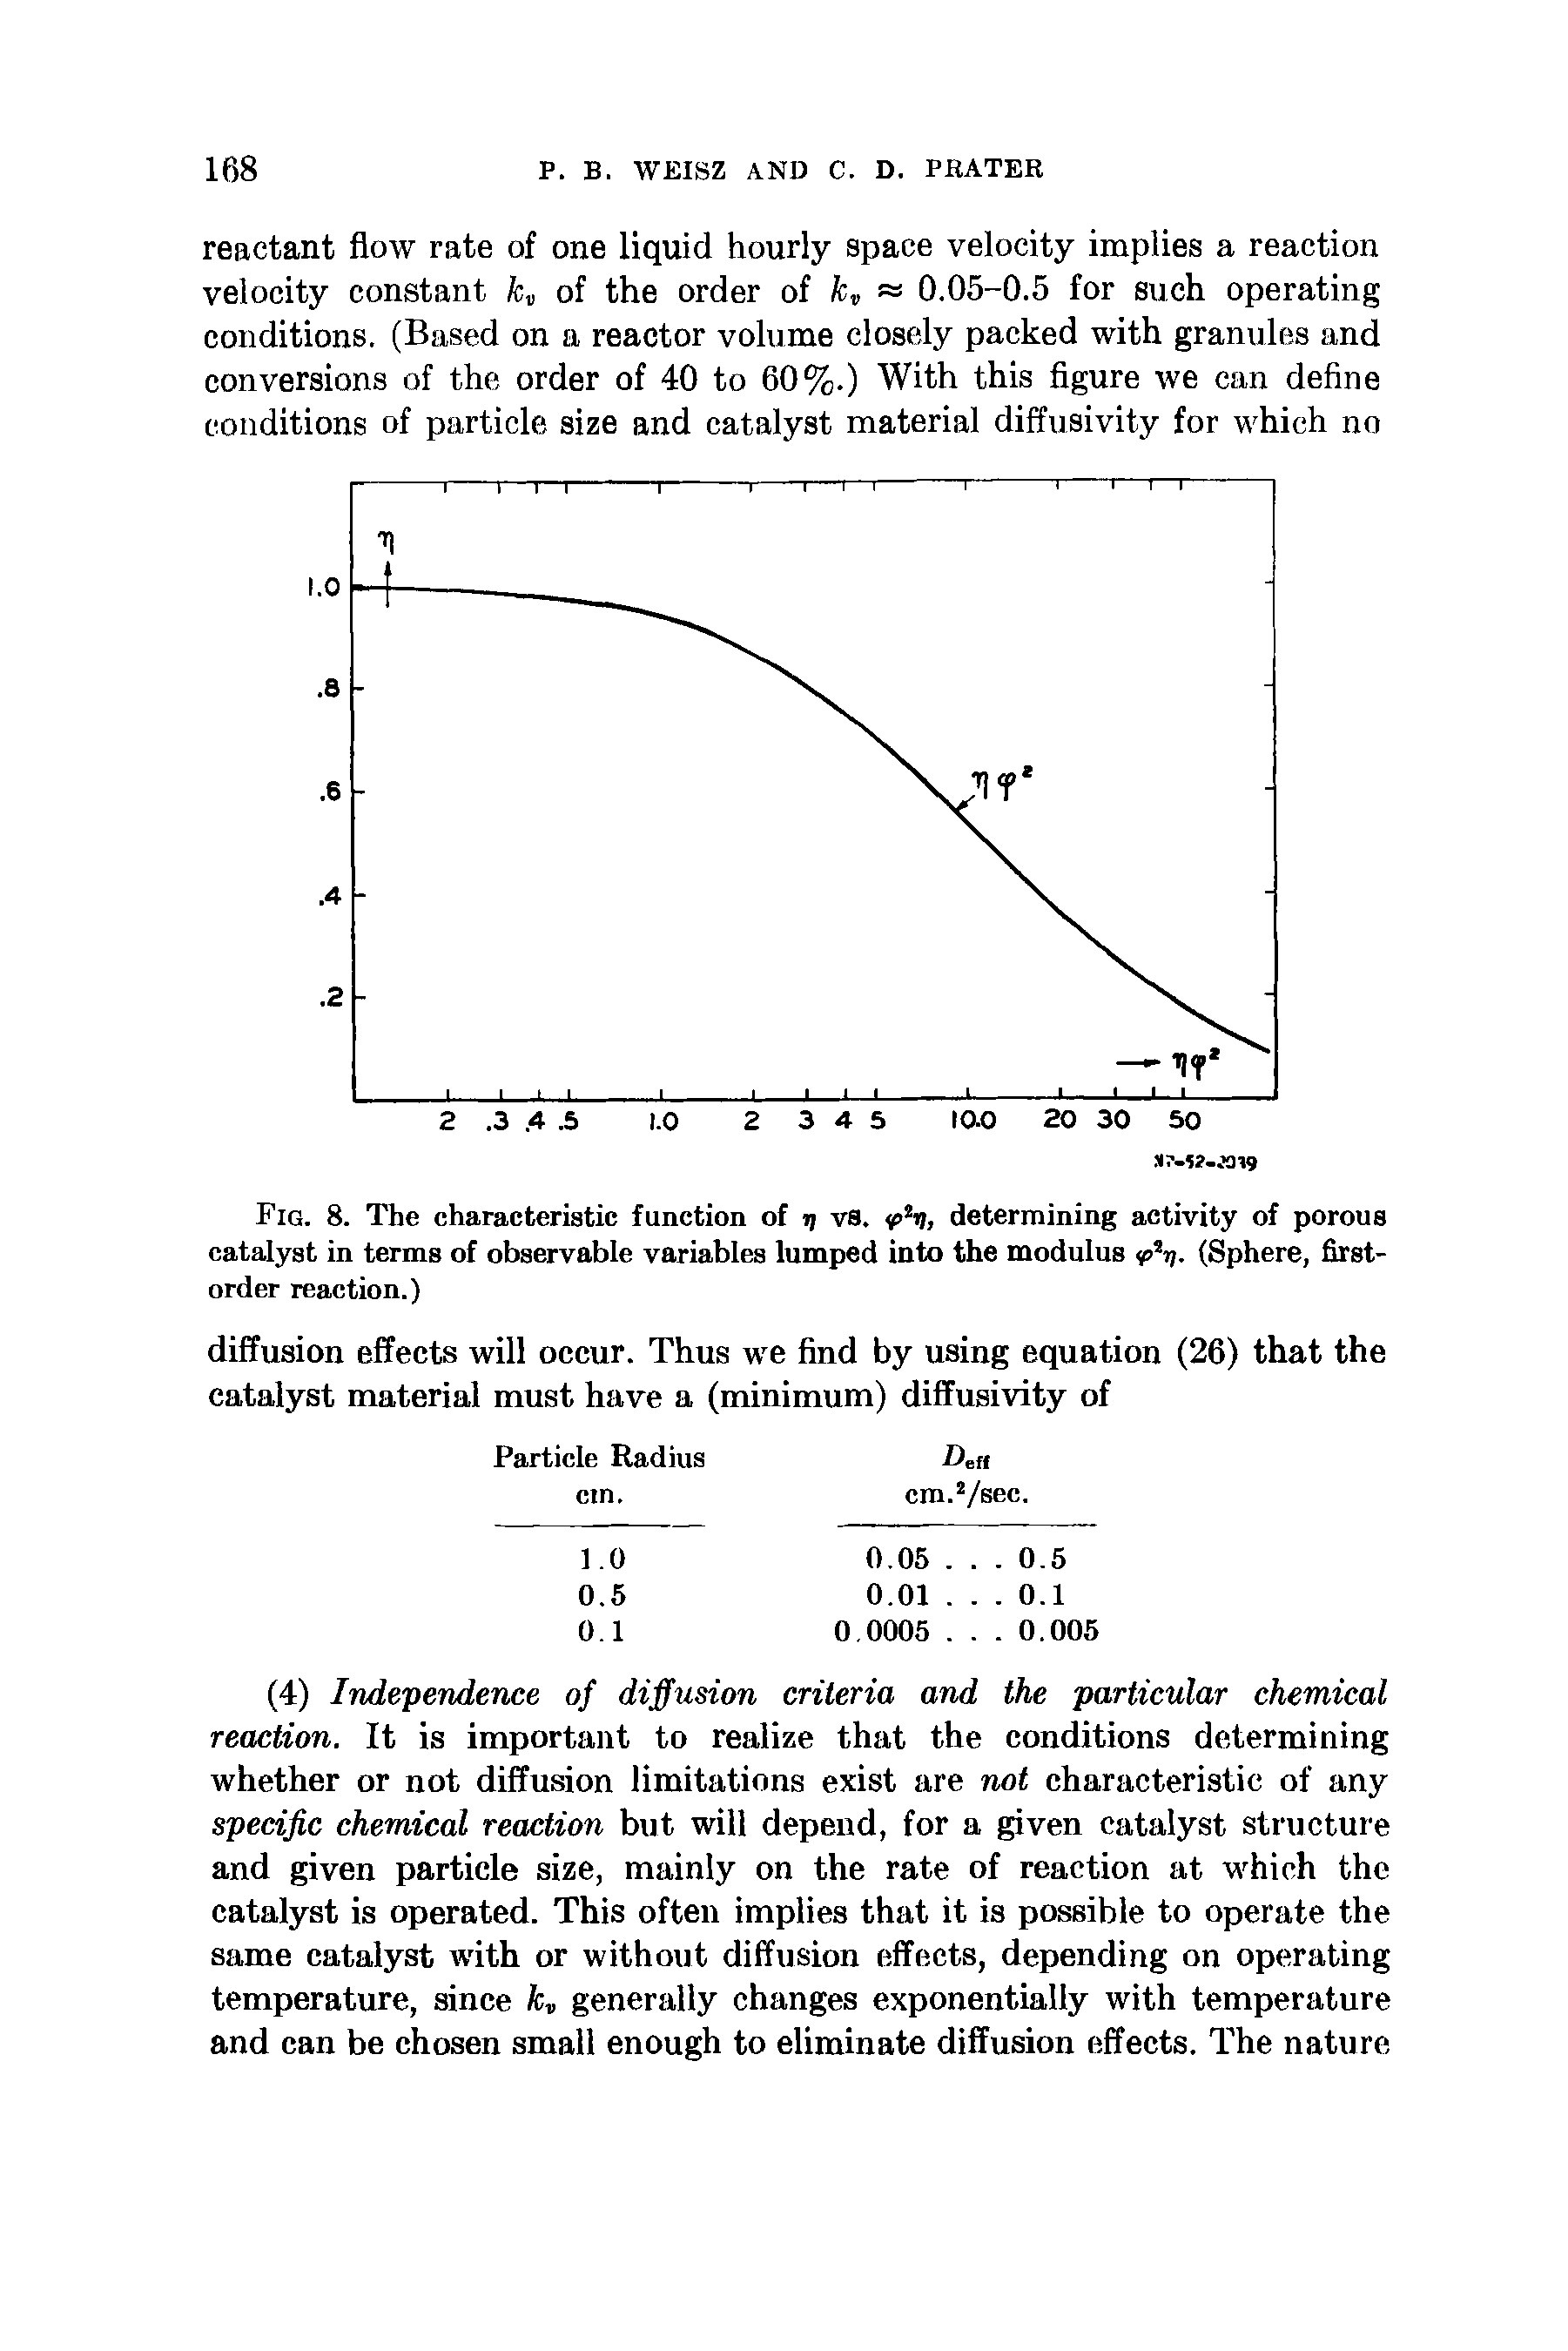 Fig. 8. The characteristic function of i vs. <phi, determining activity of porous catalyst in terms of observable variables lumped into the modulus (Sphere, first-order reaction.)...